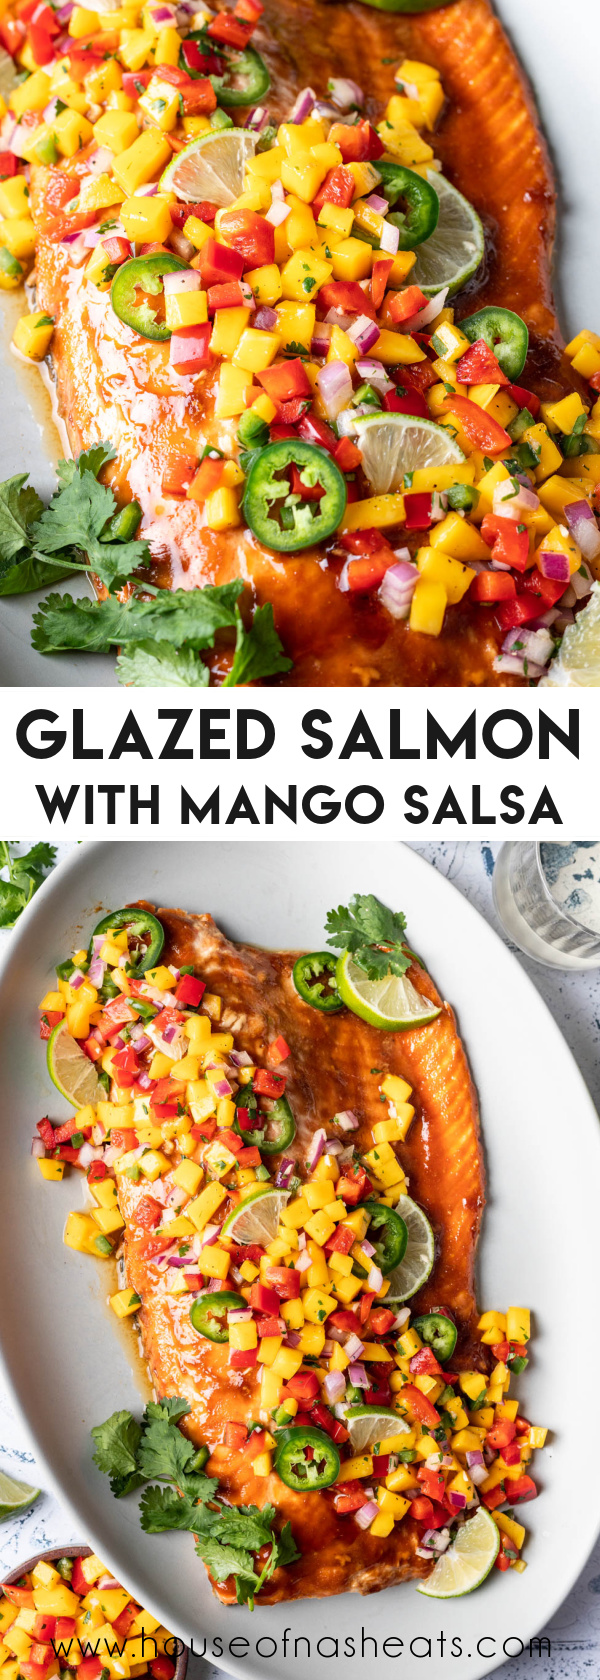 A collage of salmon and mango salsa images with text overlay.